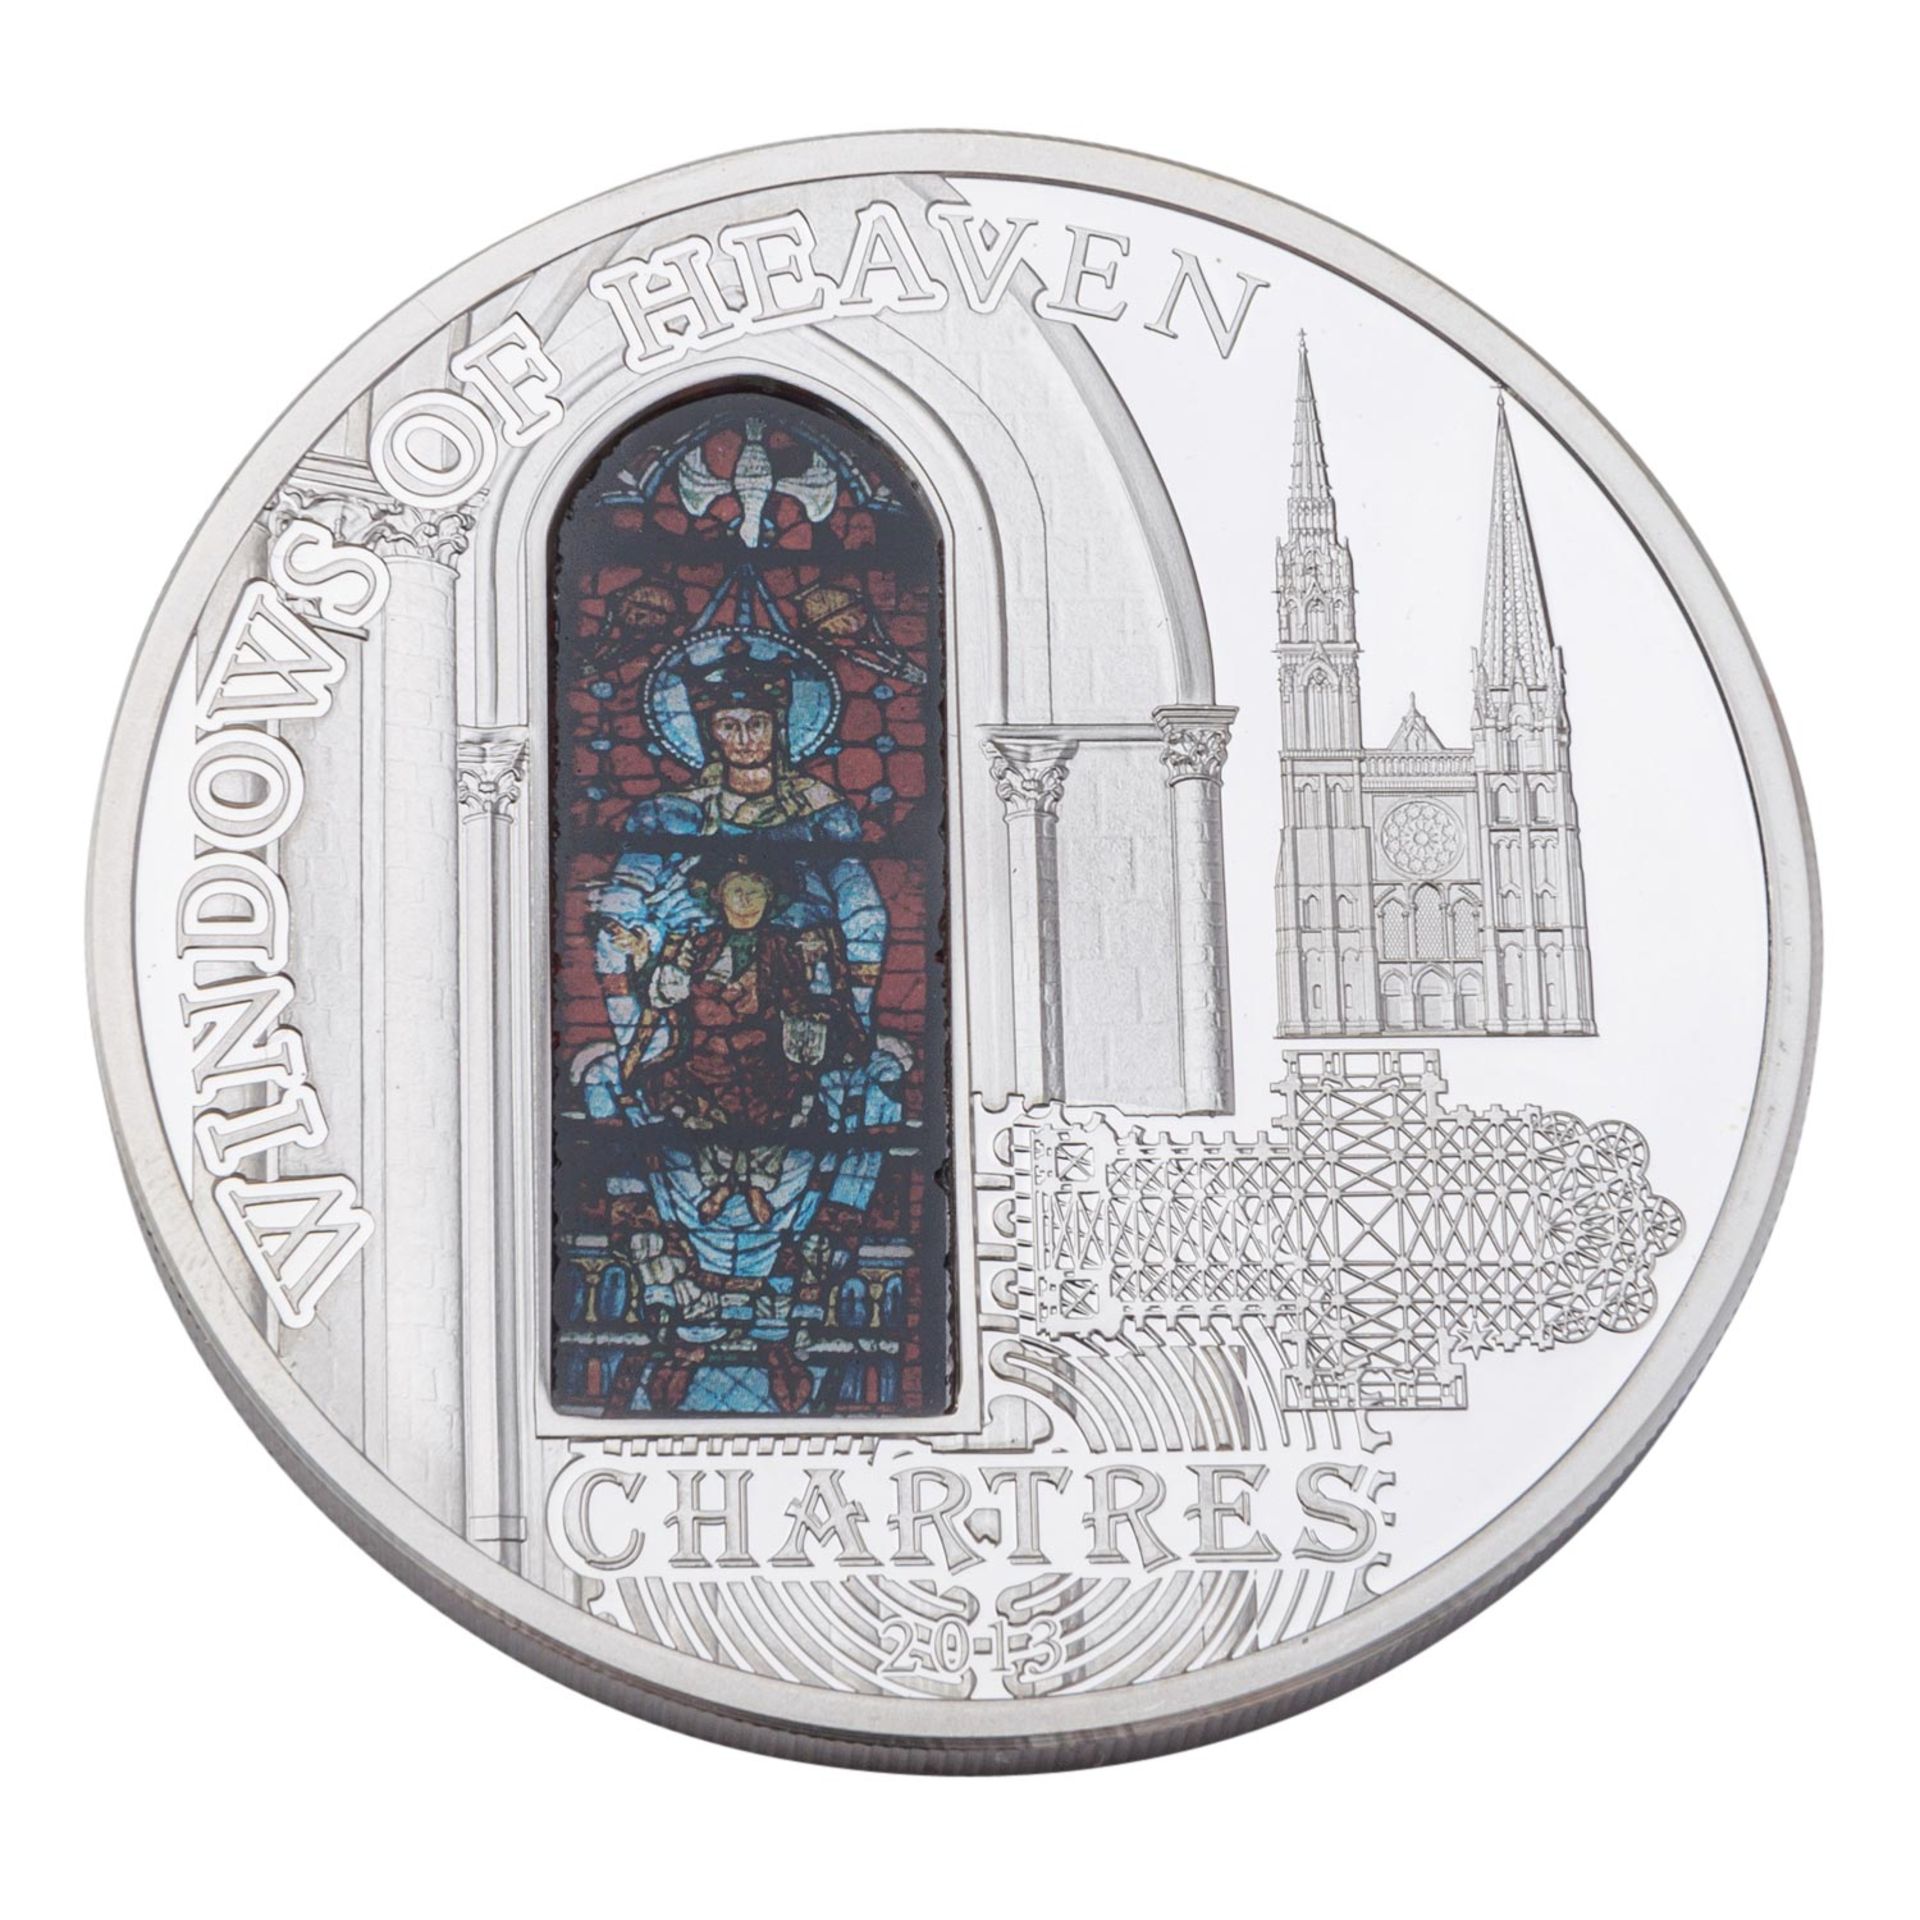 MASTERPIECES OF CRAFTS - Kathedrale von Chartres, 925 Silber, 2013, - Image 2 of 3